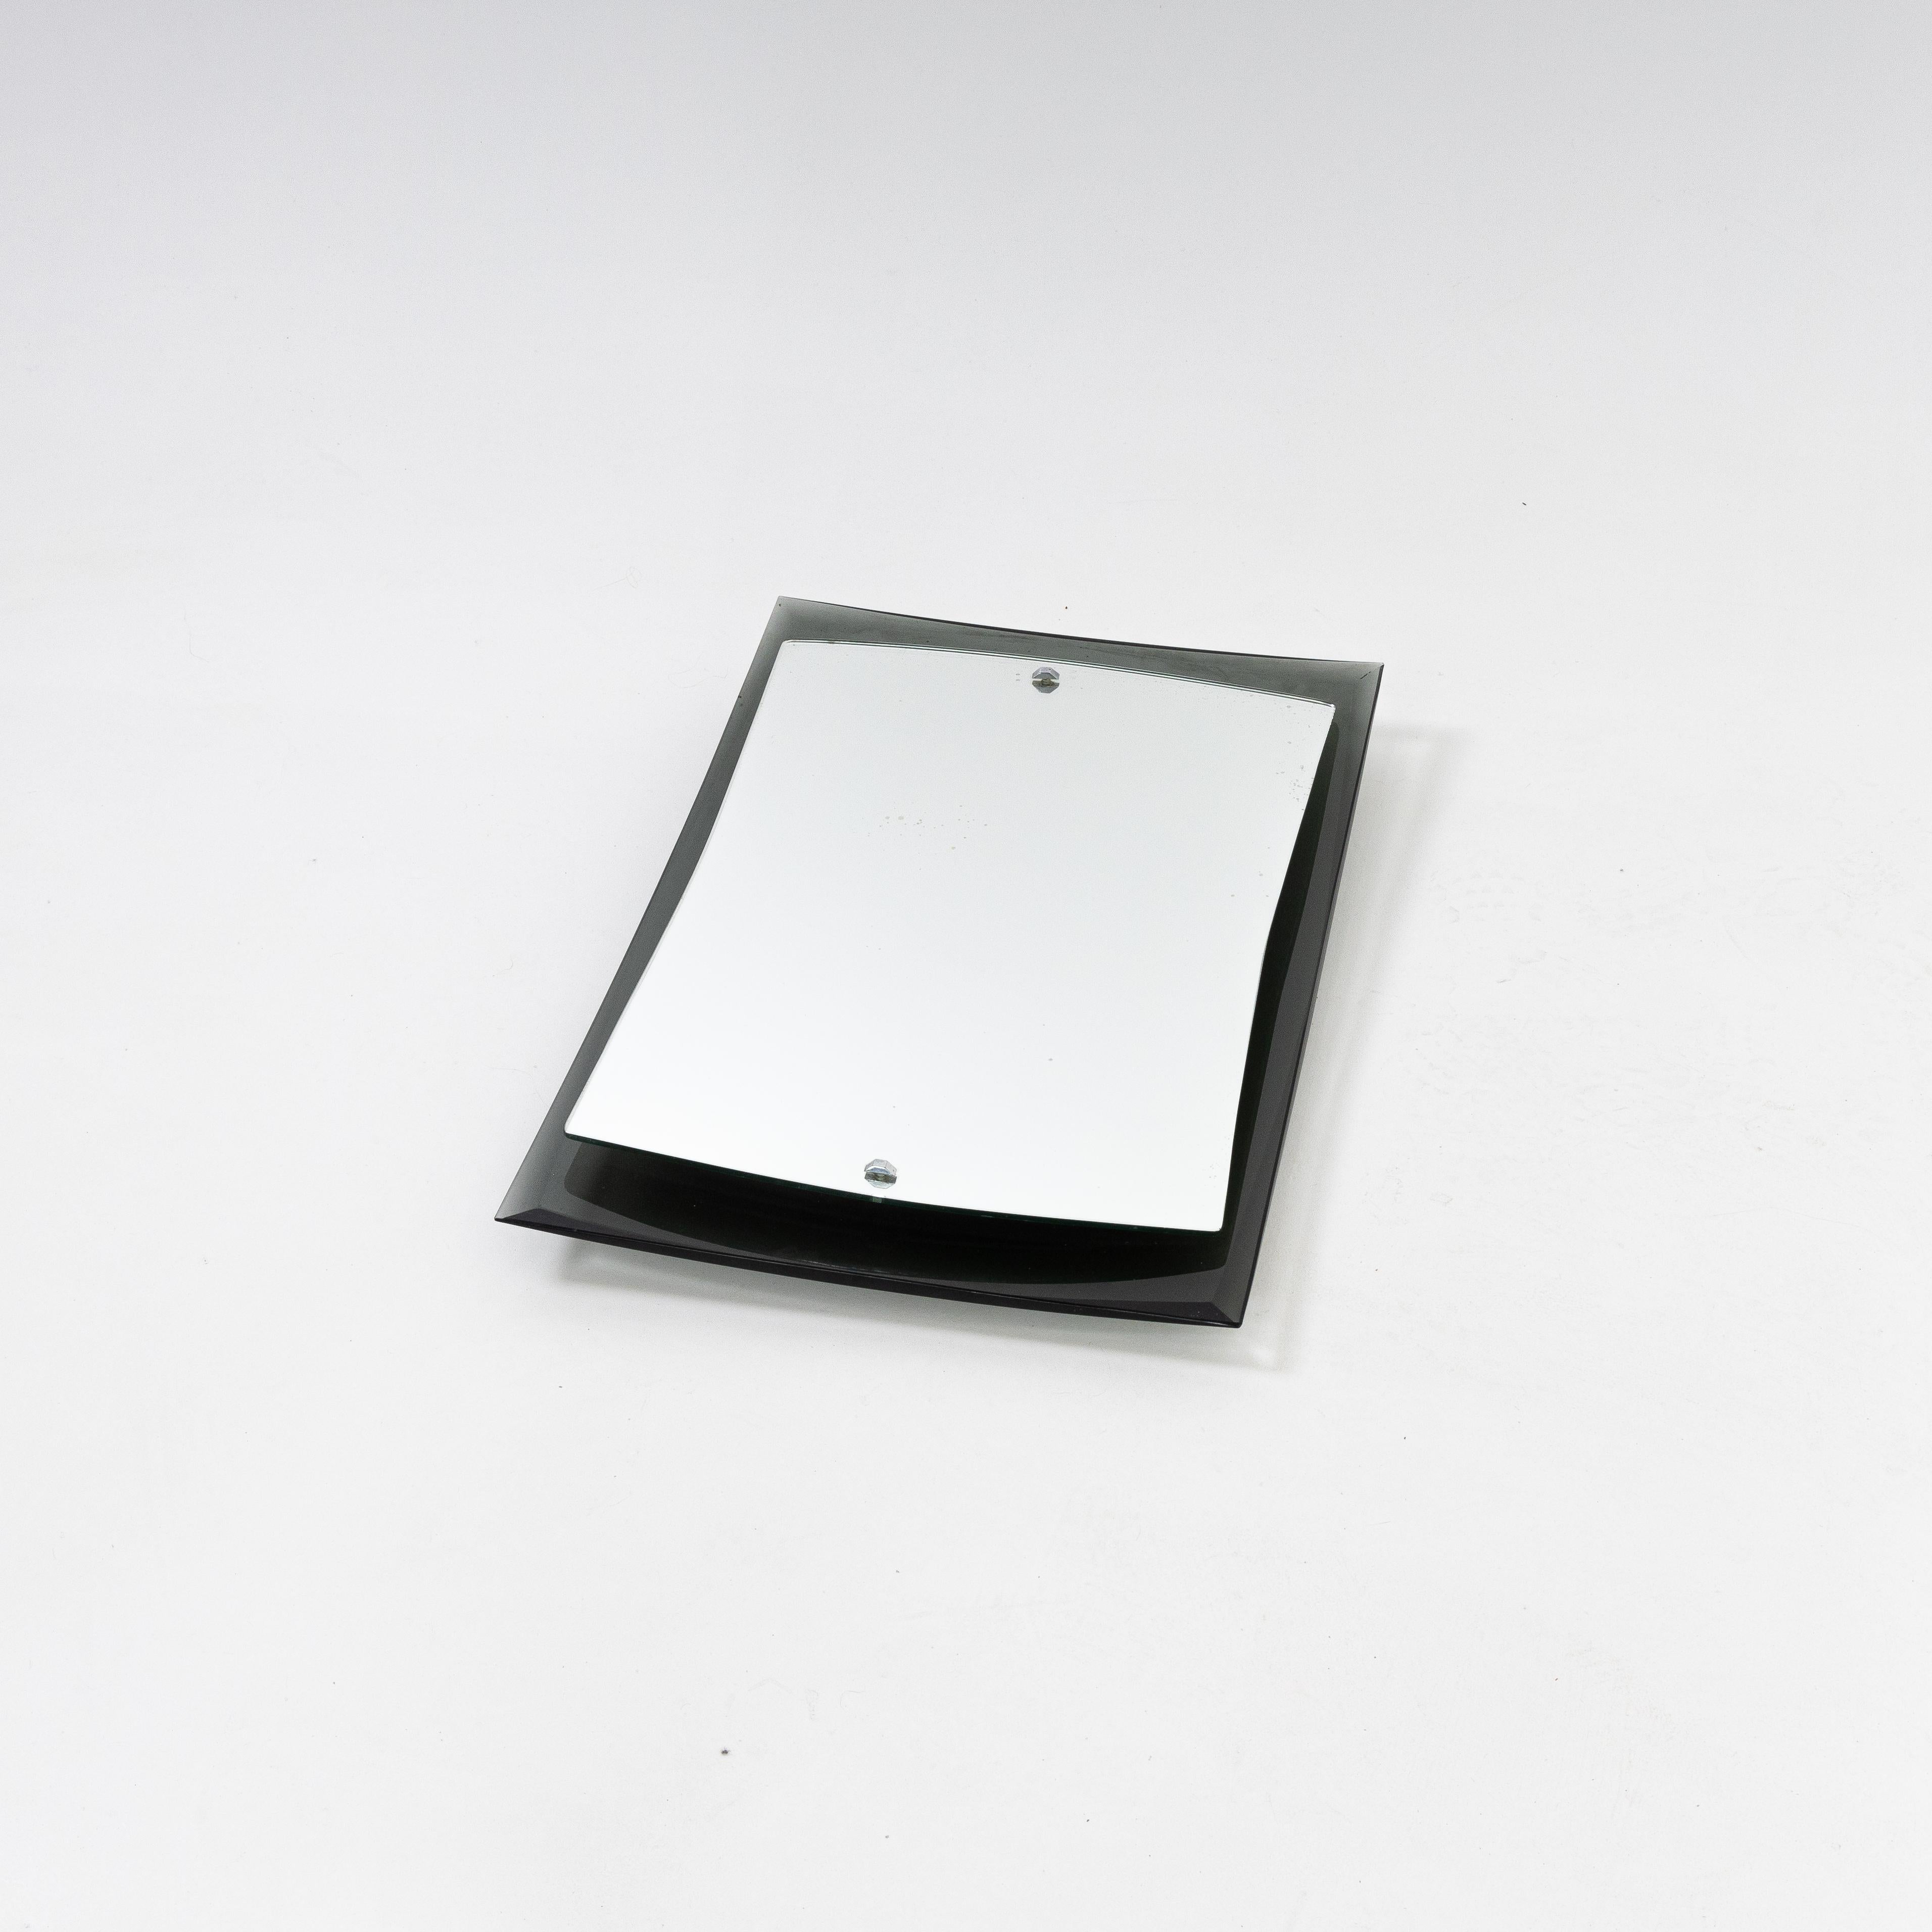 Small Italian Modernist mirror.
Curved smoked glass back 
with floating mirror mounted on top.

 